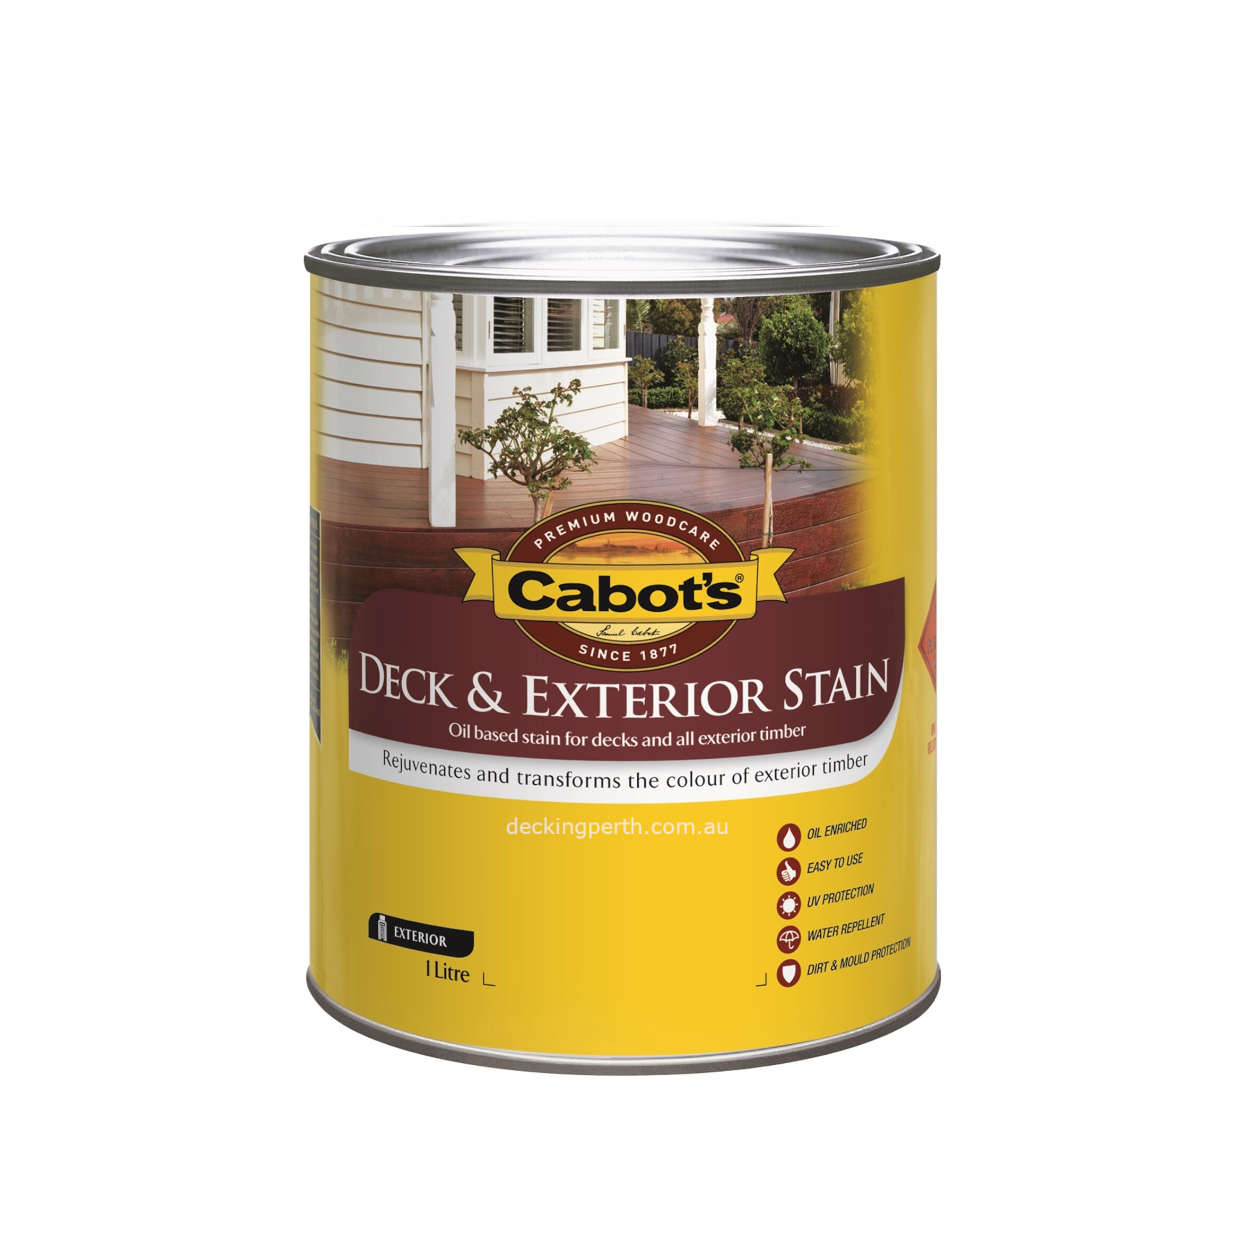  Analyzing image    Cabots_Deck___Exterior_Stain_Oil_Based_1_Litre_Decking_Perth